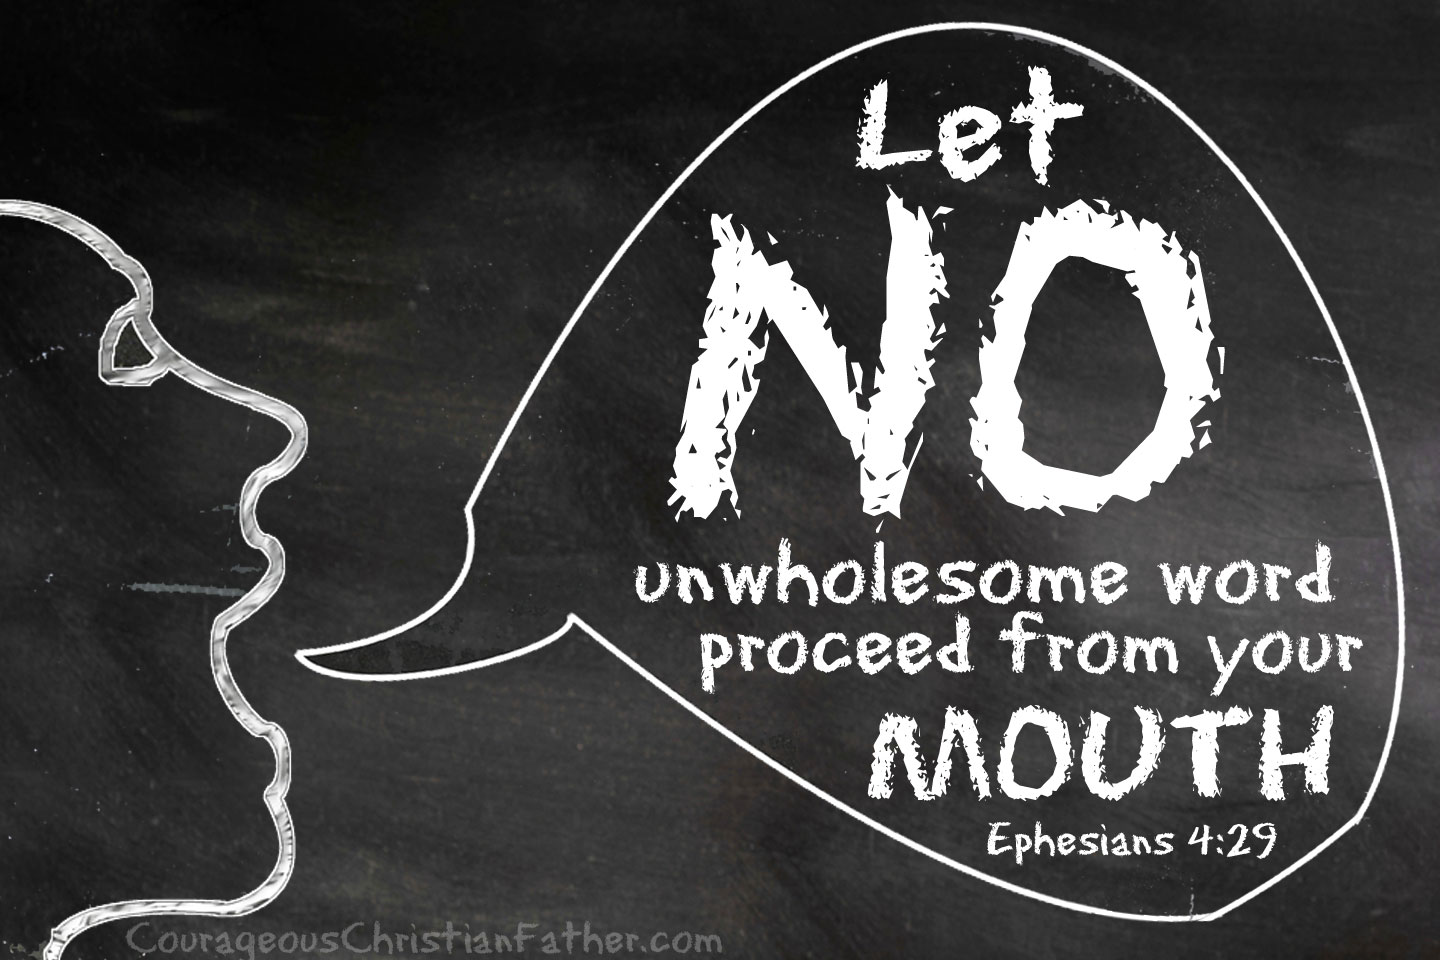 VOTD October 19 - Let no unwholesome word proceed from your mouth, but only such a word as is good for edification according to the need of the moment, so that it will give grace to those who hear. Ephesians 4:29 NASB